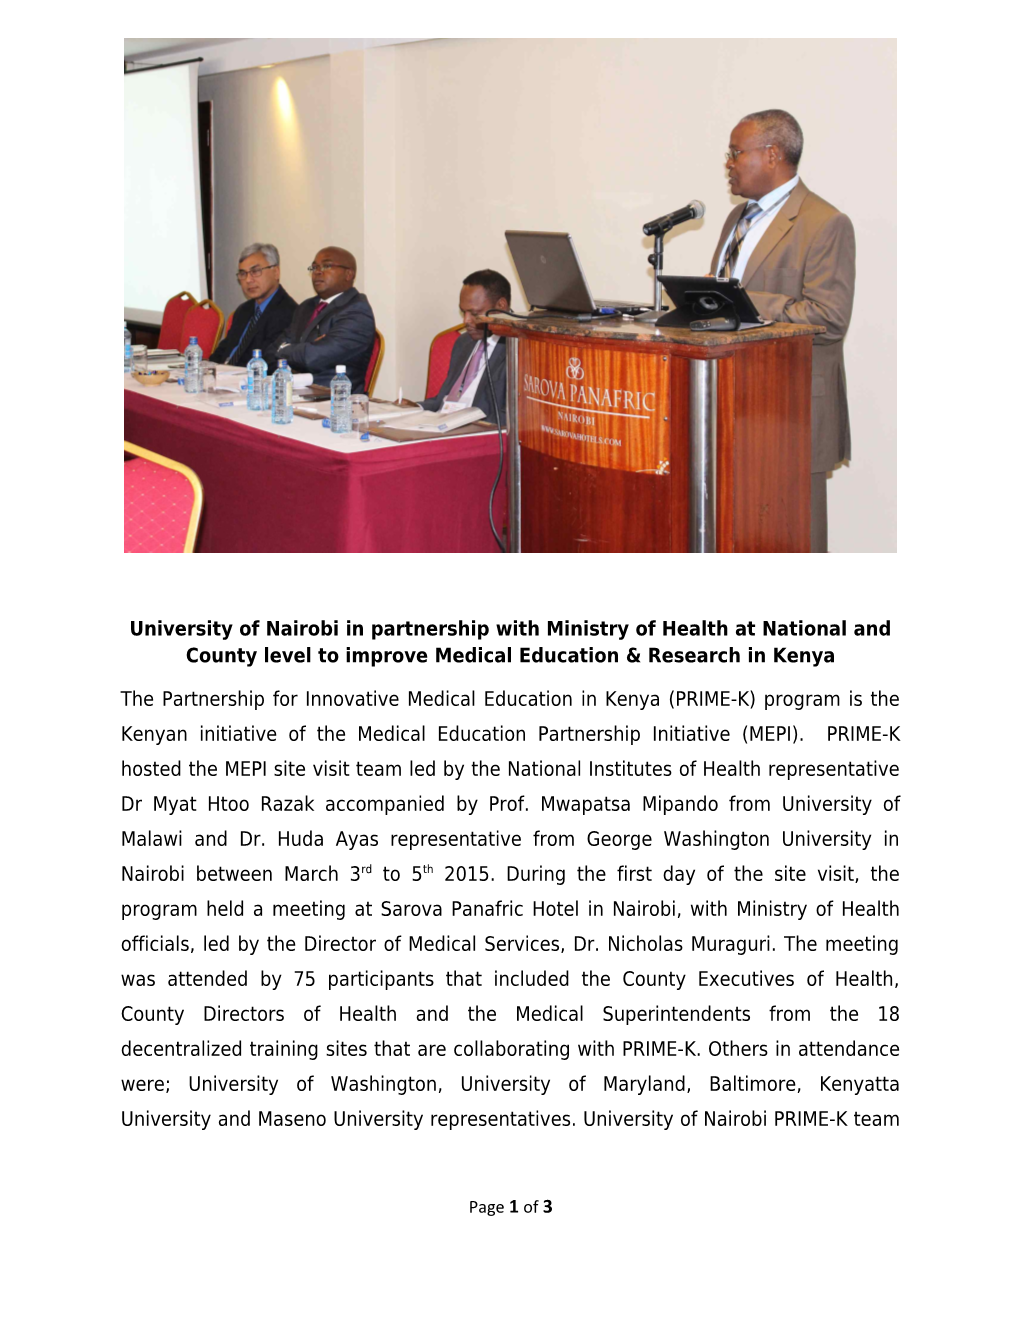 University of Nairobi in Partnership with Ministry of Health at National and County Level